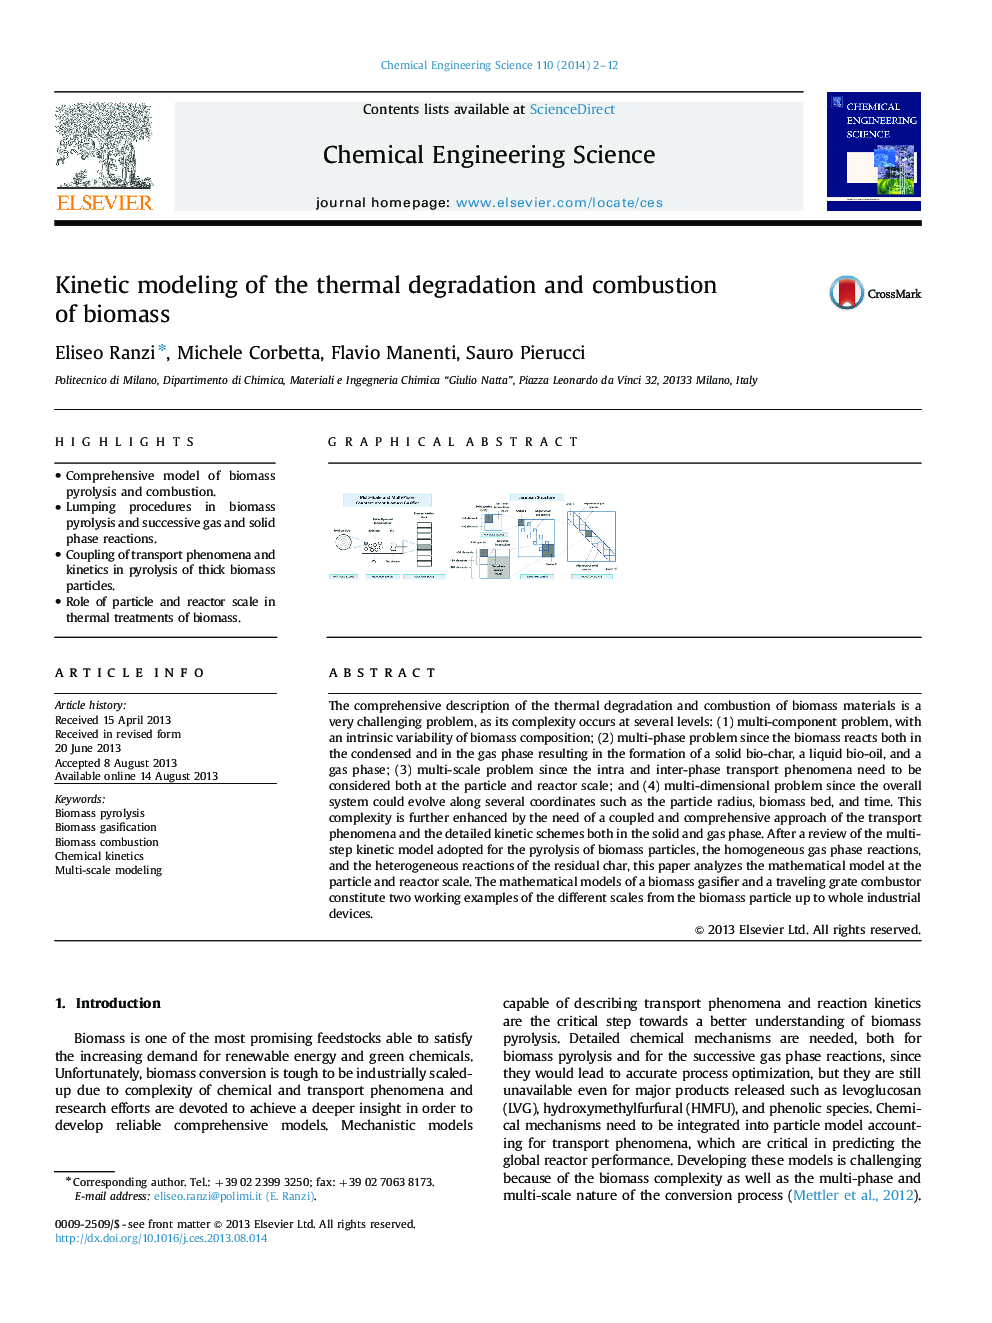 Kinetic modeling of the thermal degradation and combustion of biomass